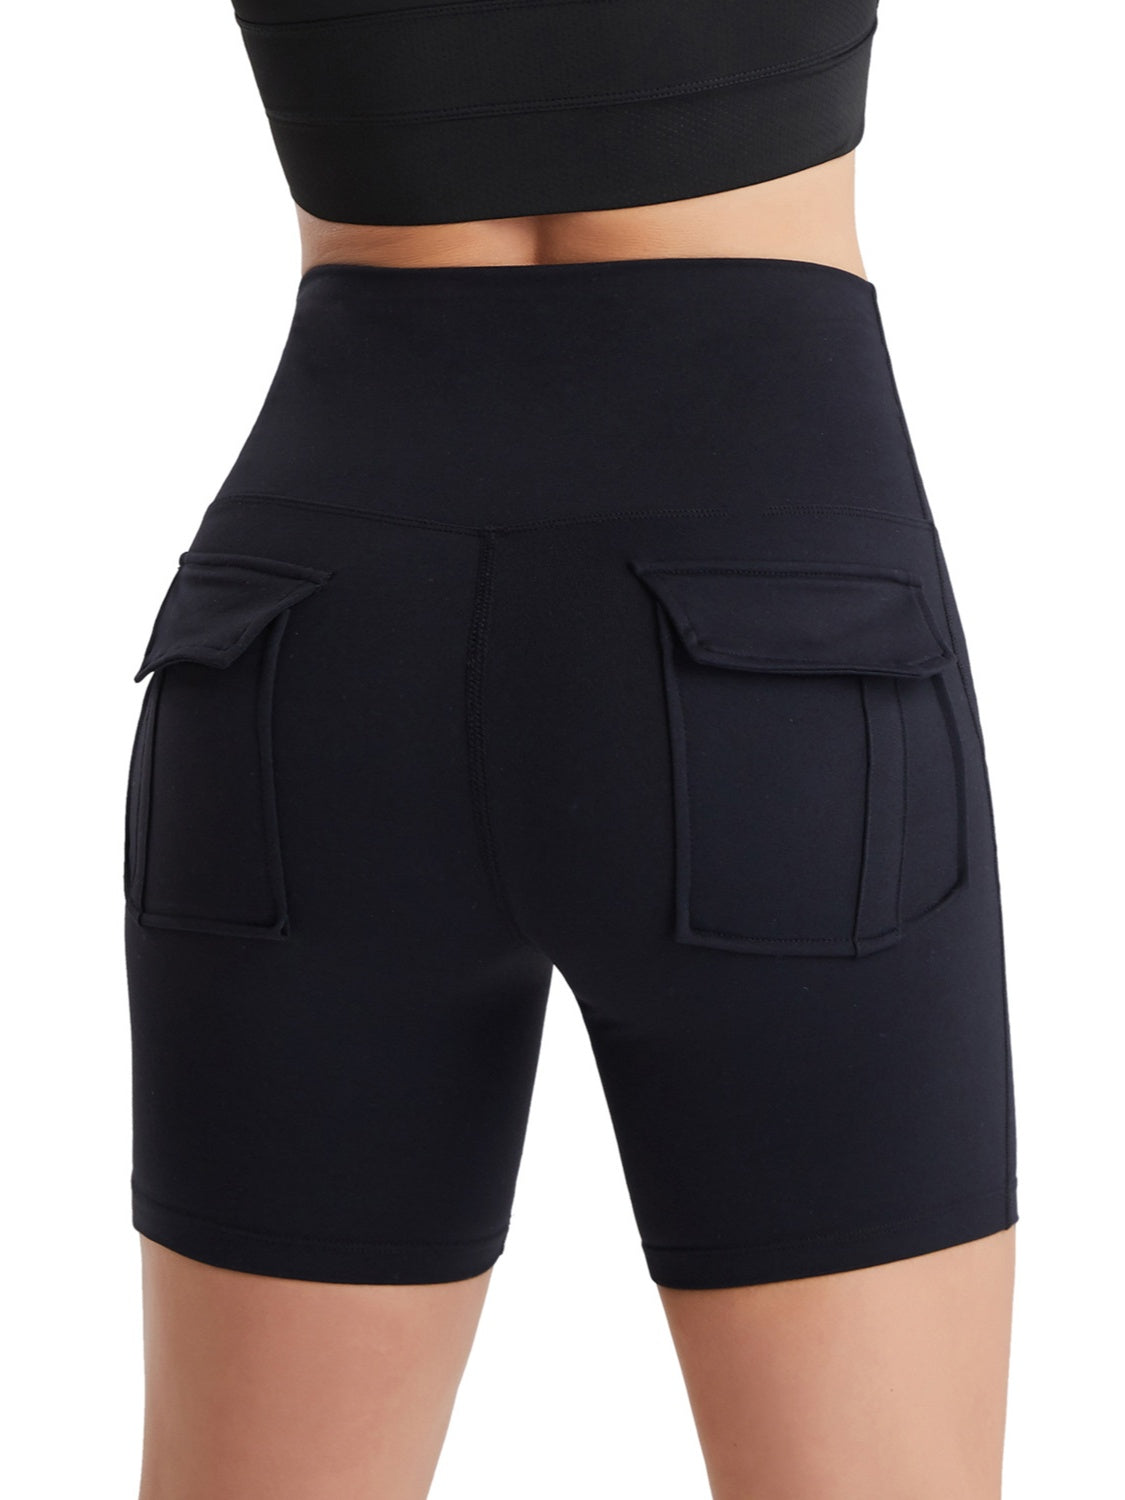 Make It Pop Pocketed High Waist Active Shorts (Multiple Colors) - BP